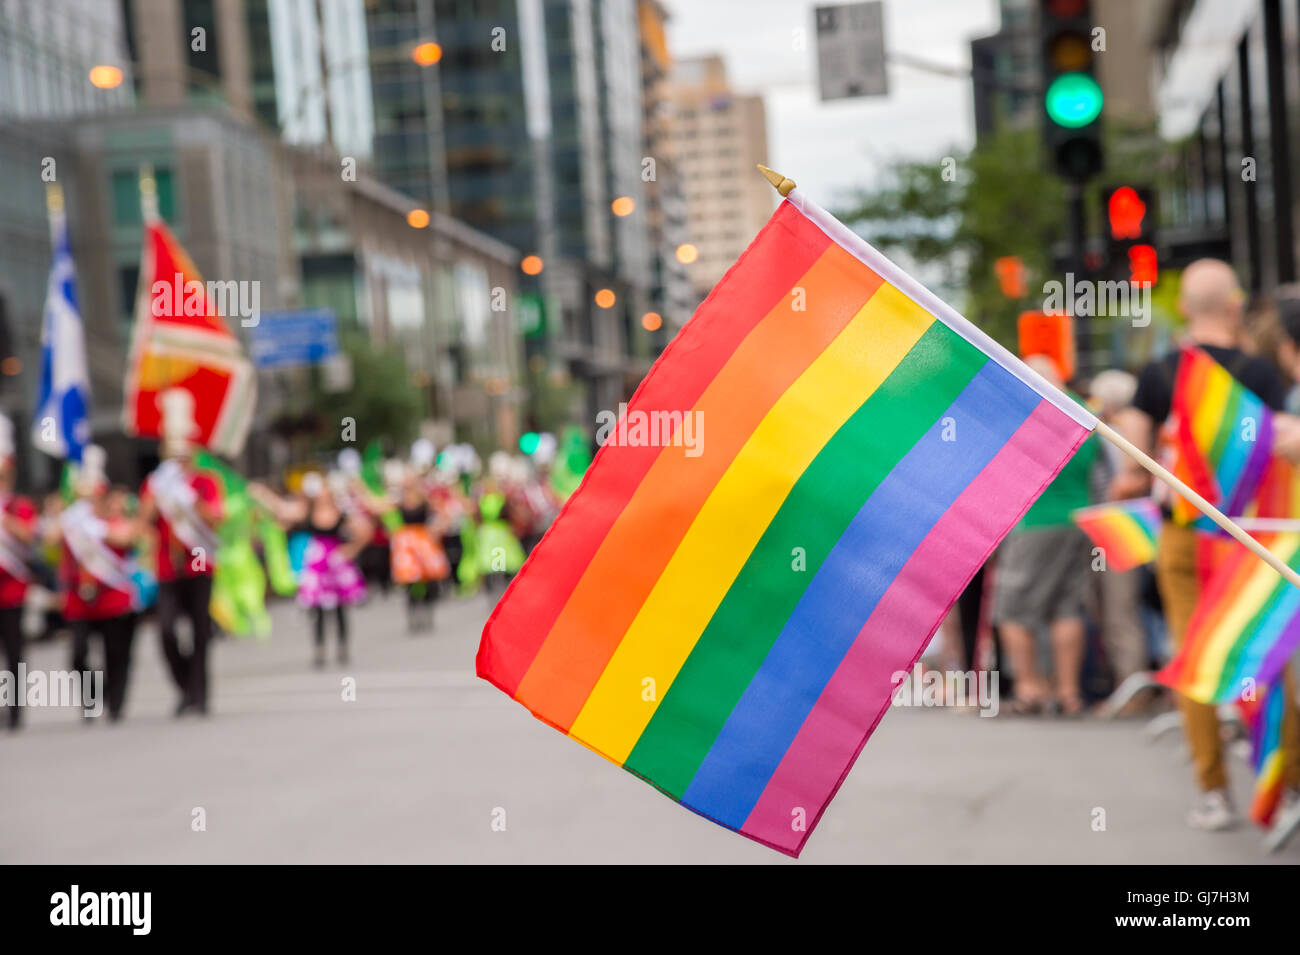 Gay rainbow flags at Montreal gay pride parade with blurred spectators in the background Stock Photo